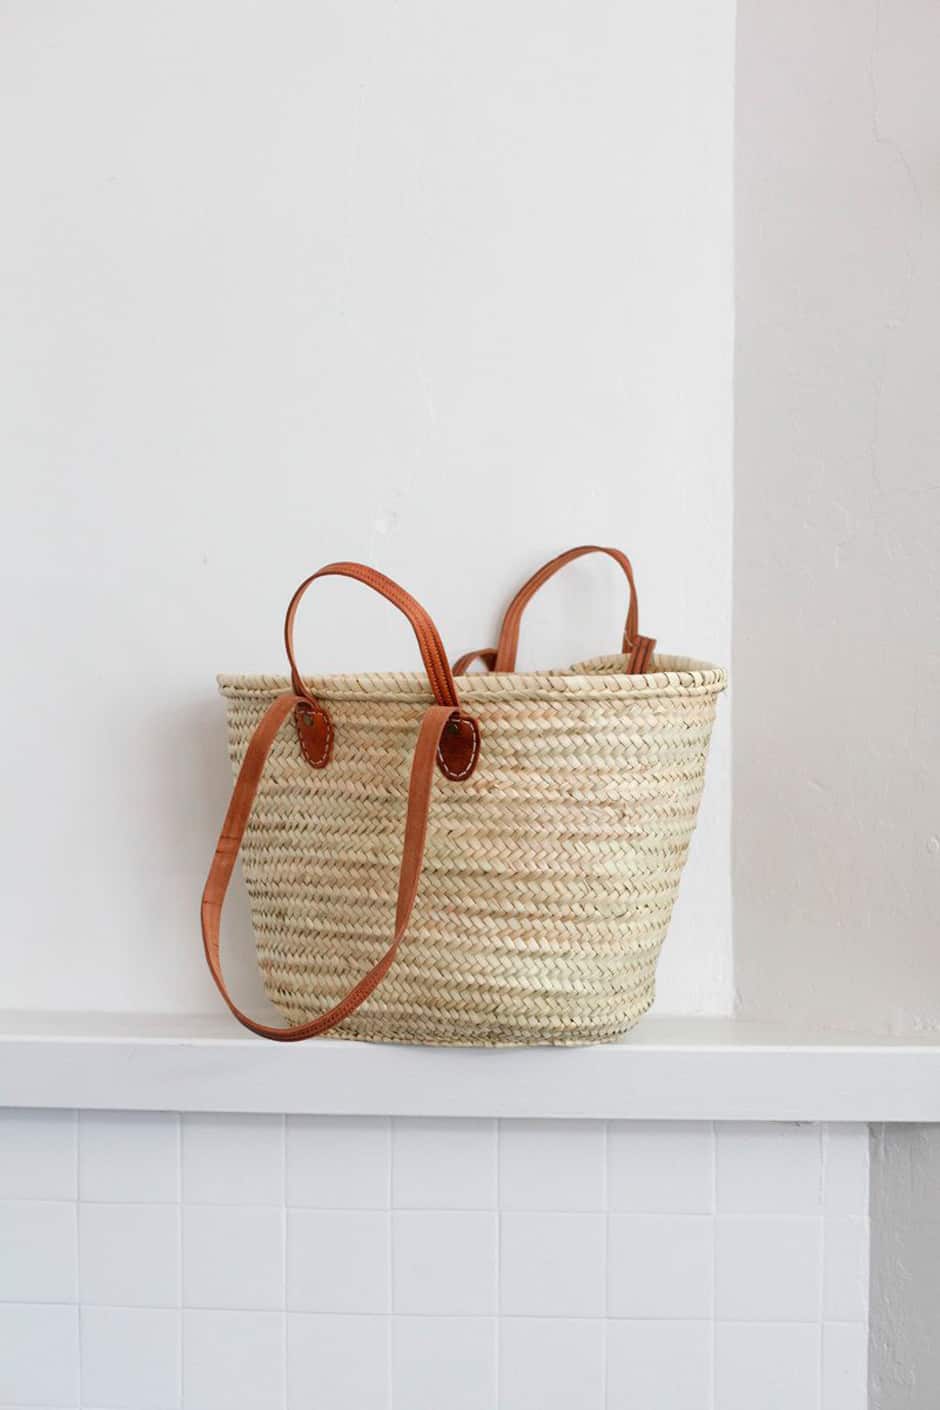 bags-homestyle-5